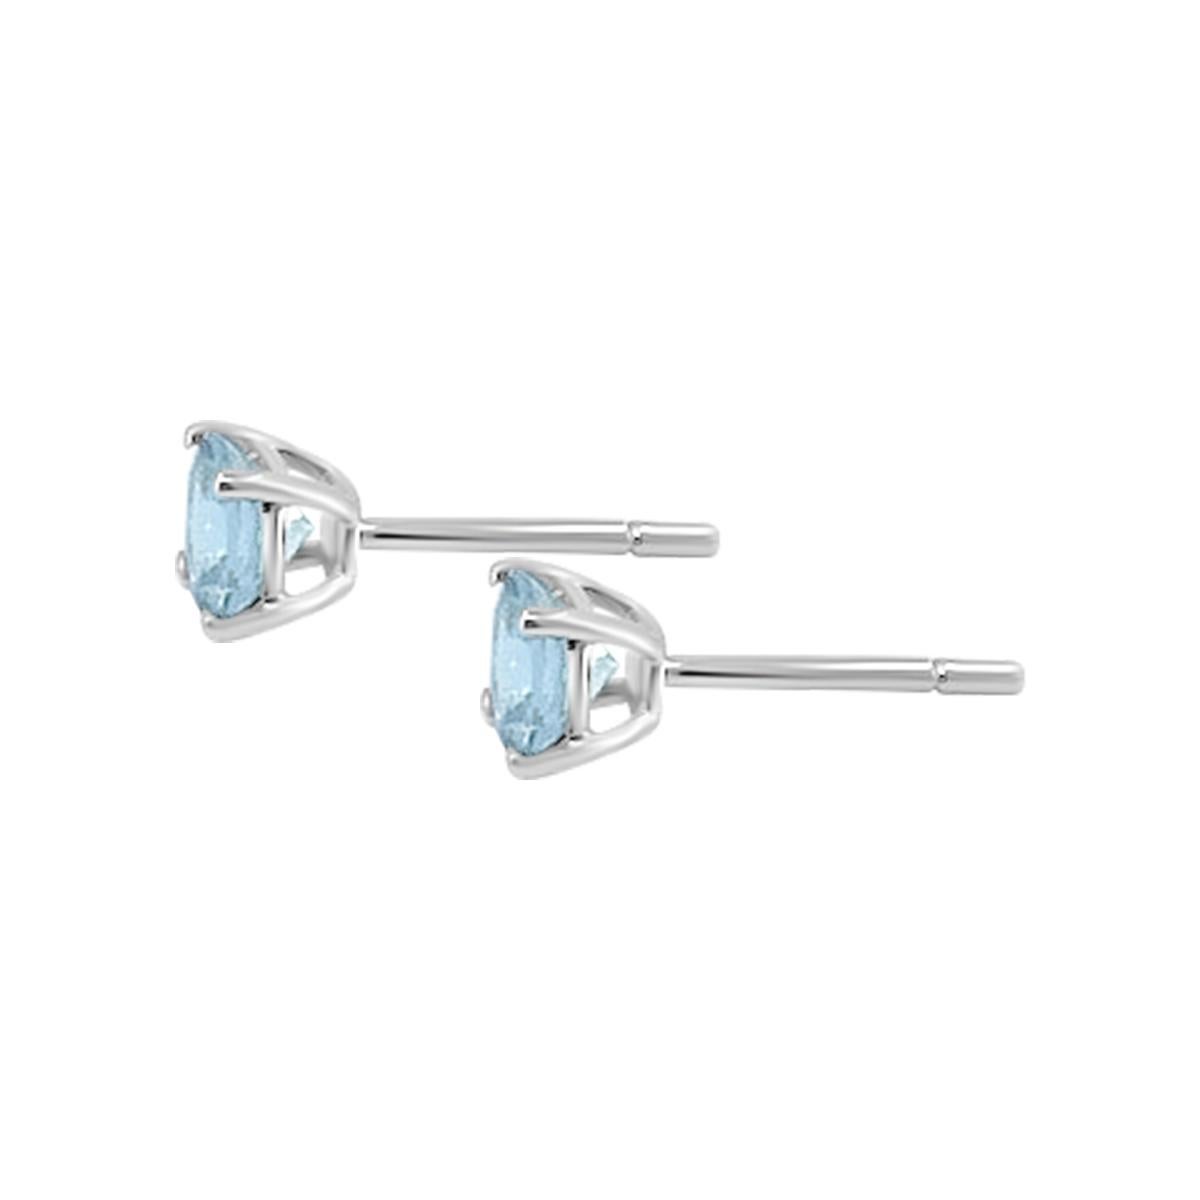 This Aquamarine Stud Earring Can Be The Ultimate Souvenir For Your Love.
Breathtaking 5mm Round Cut  Aquamarine With Four Prong Setting Crafted In 14K White Gold has A Timeless Appeal 

Style# TS1325AQE
Aquamarine: Round  5mm 0.88cts